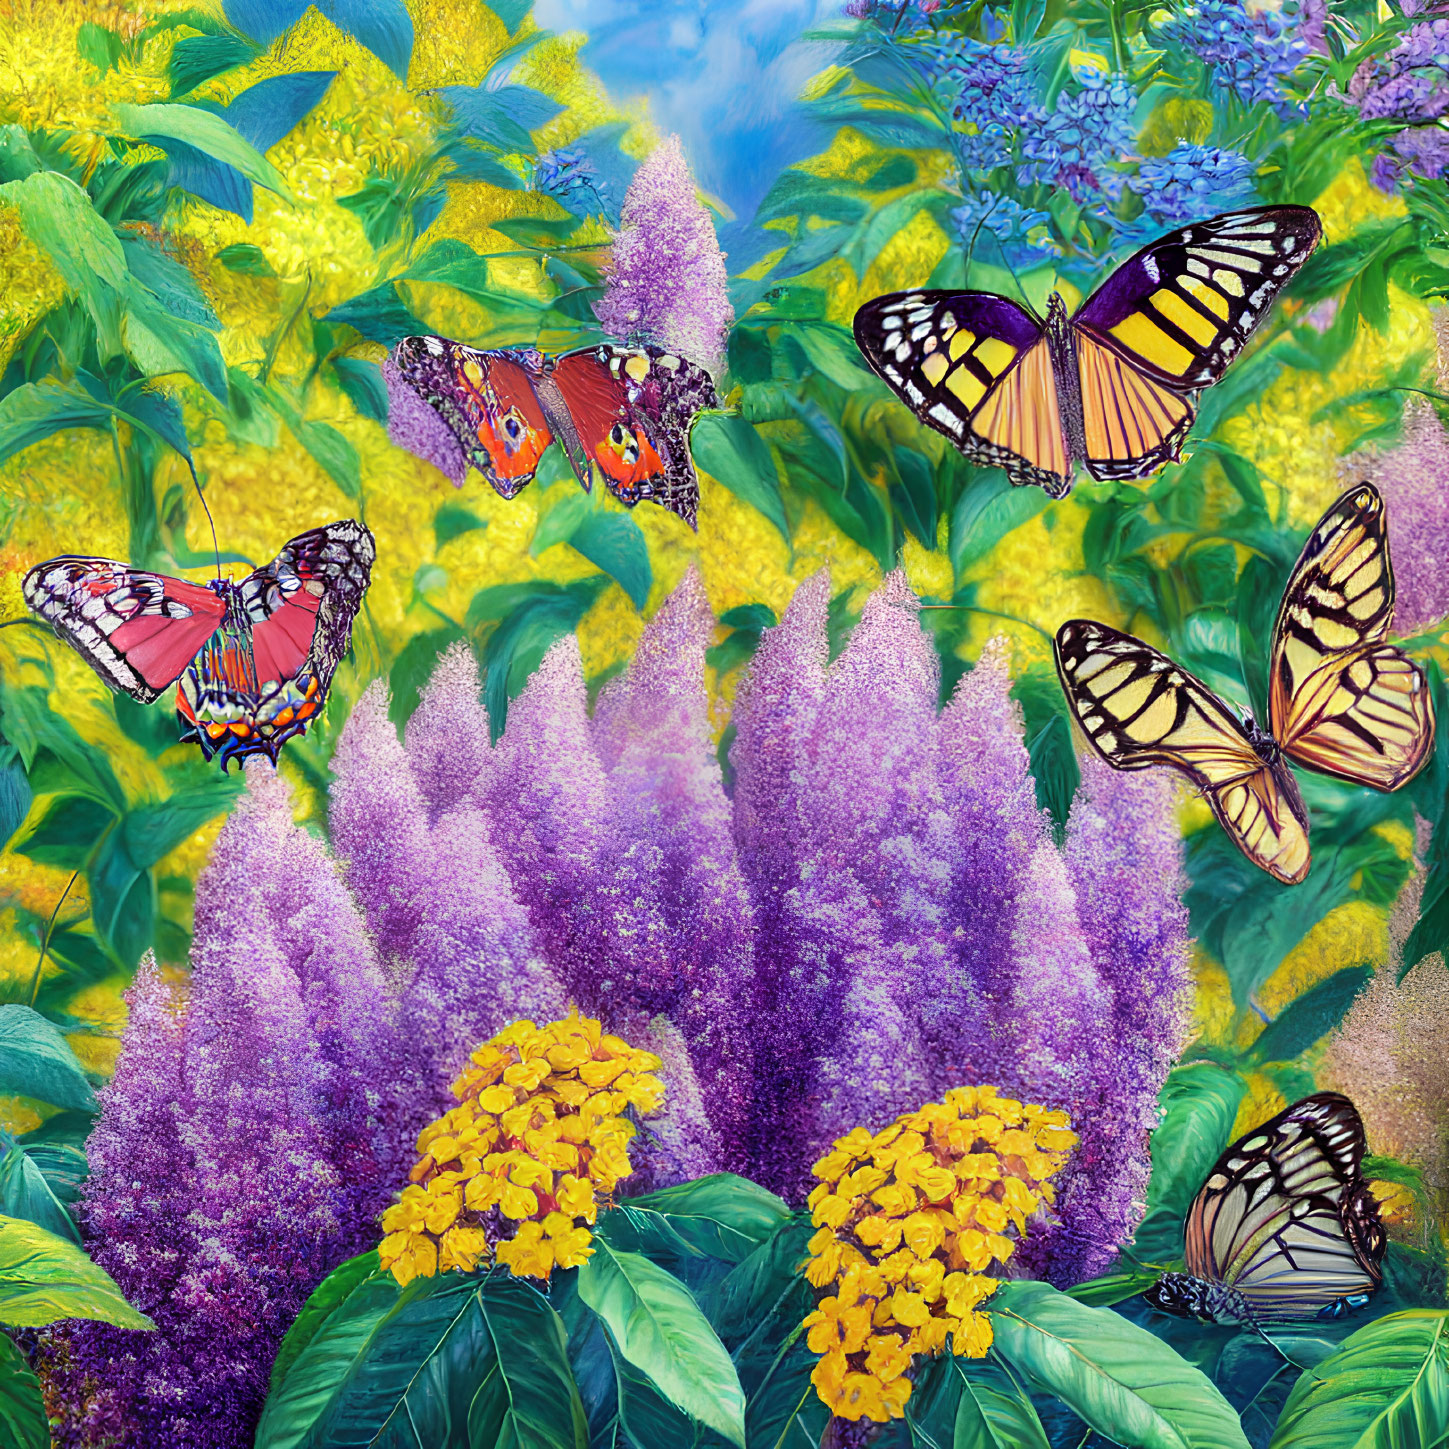 Colorful Garden with Purple and Yellow Flowers and Butterflies